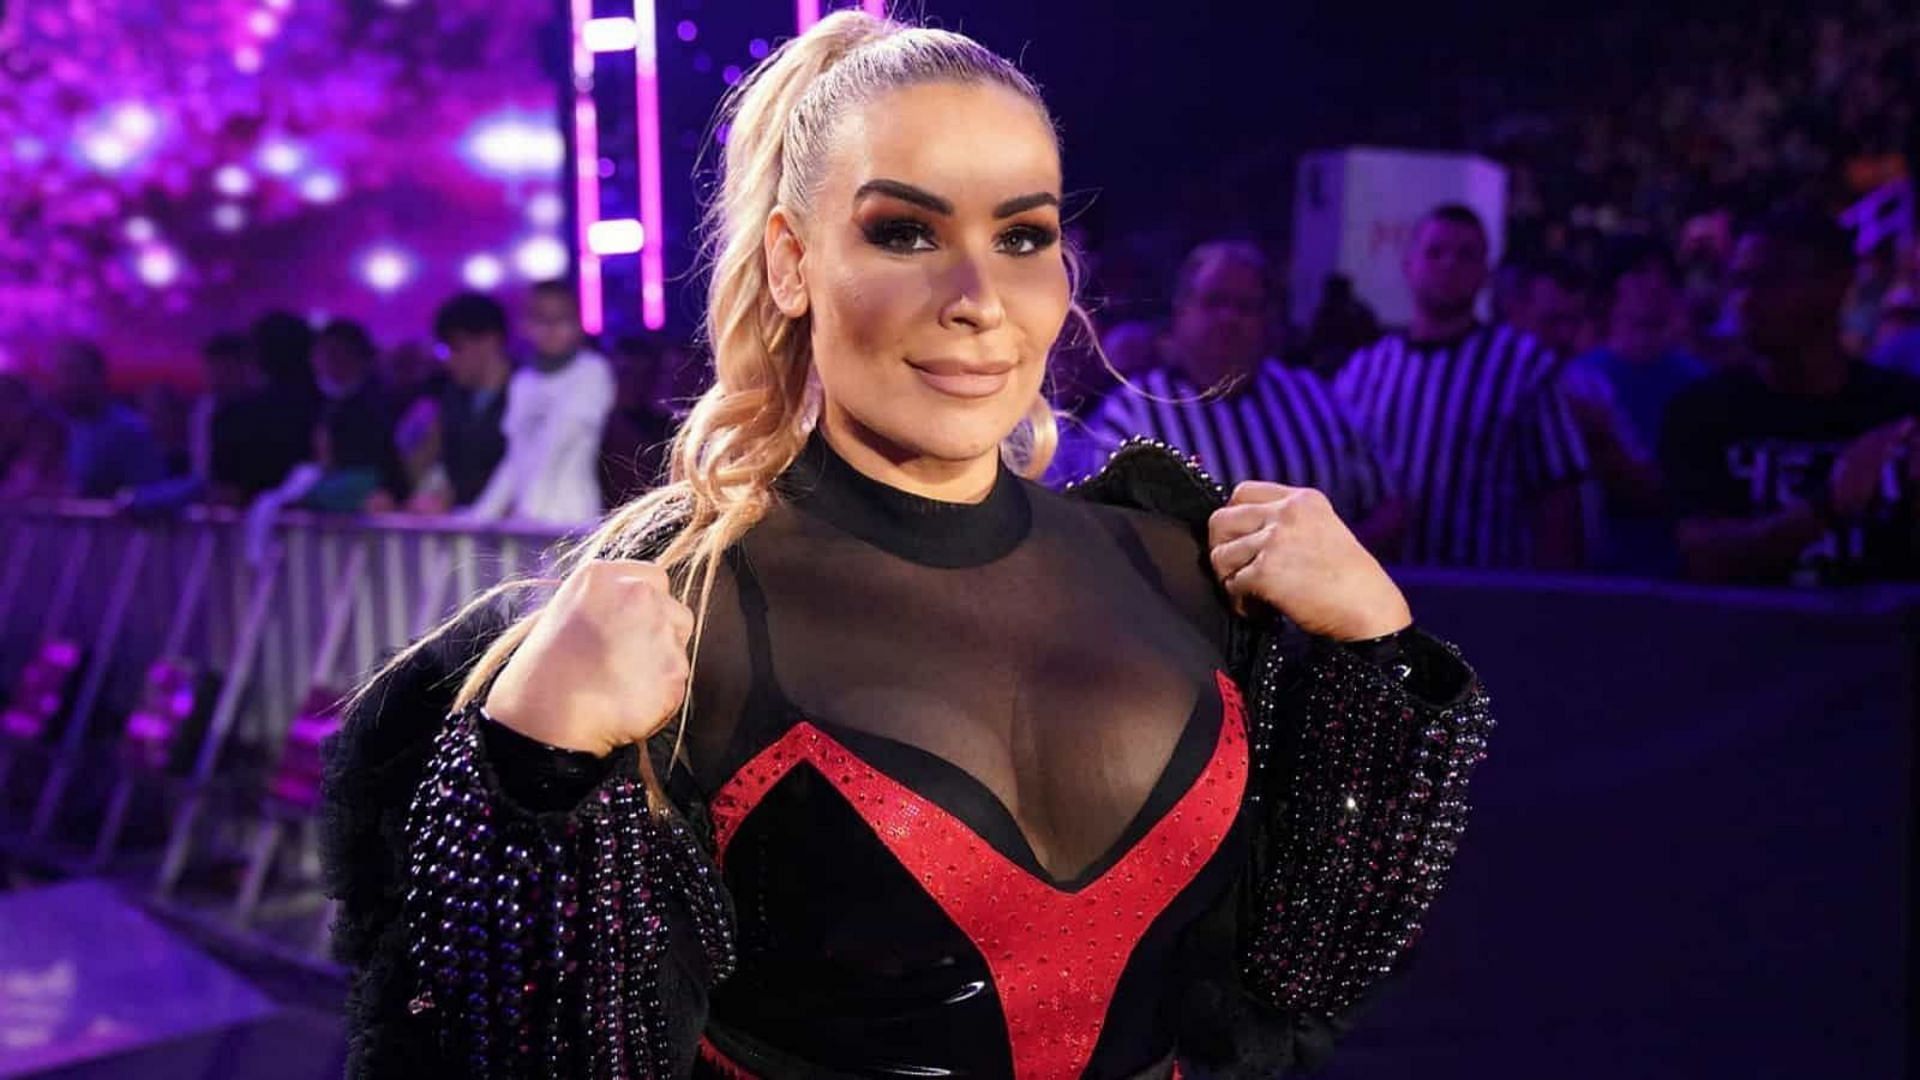 Natalya has defeated all Four Horsewomen